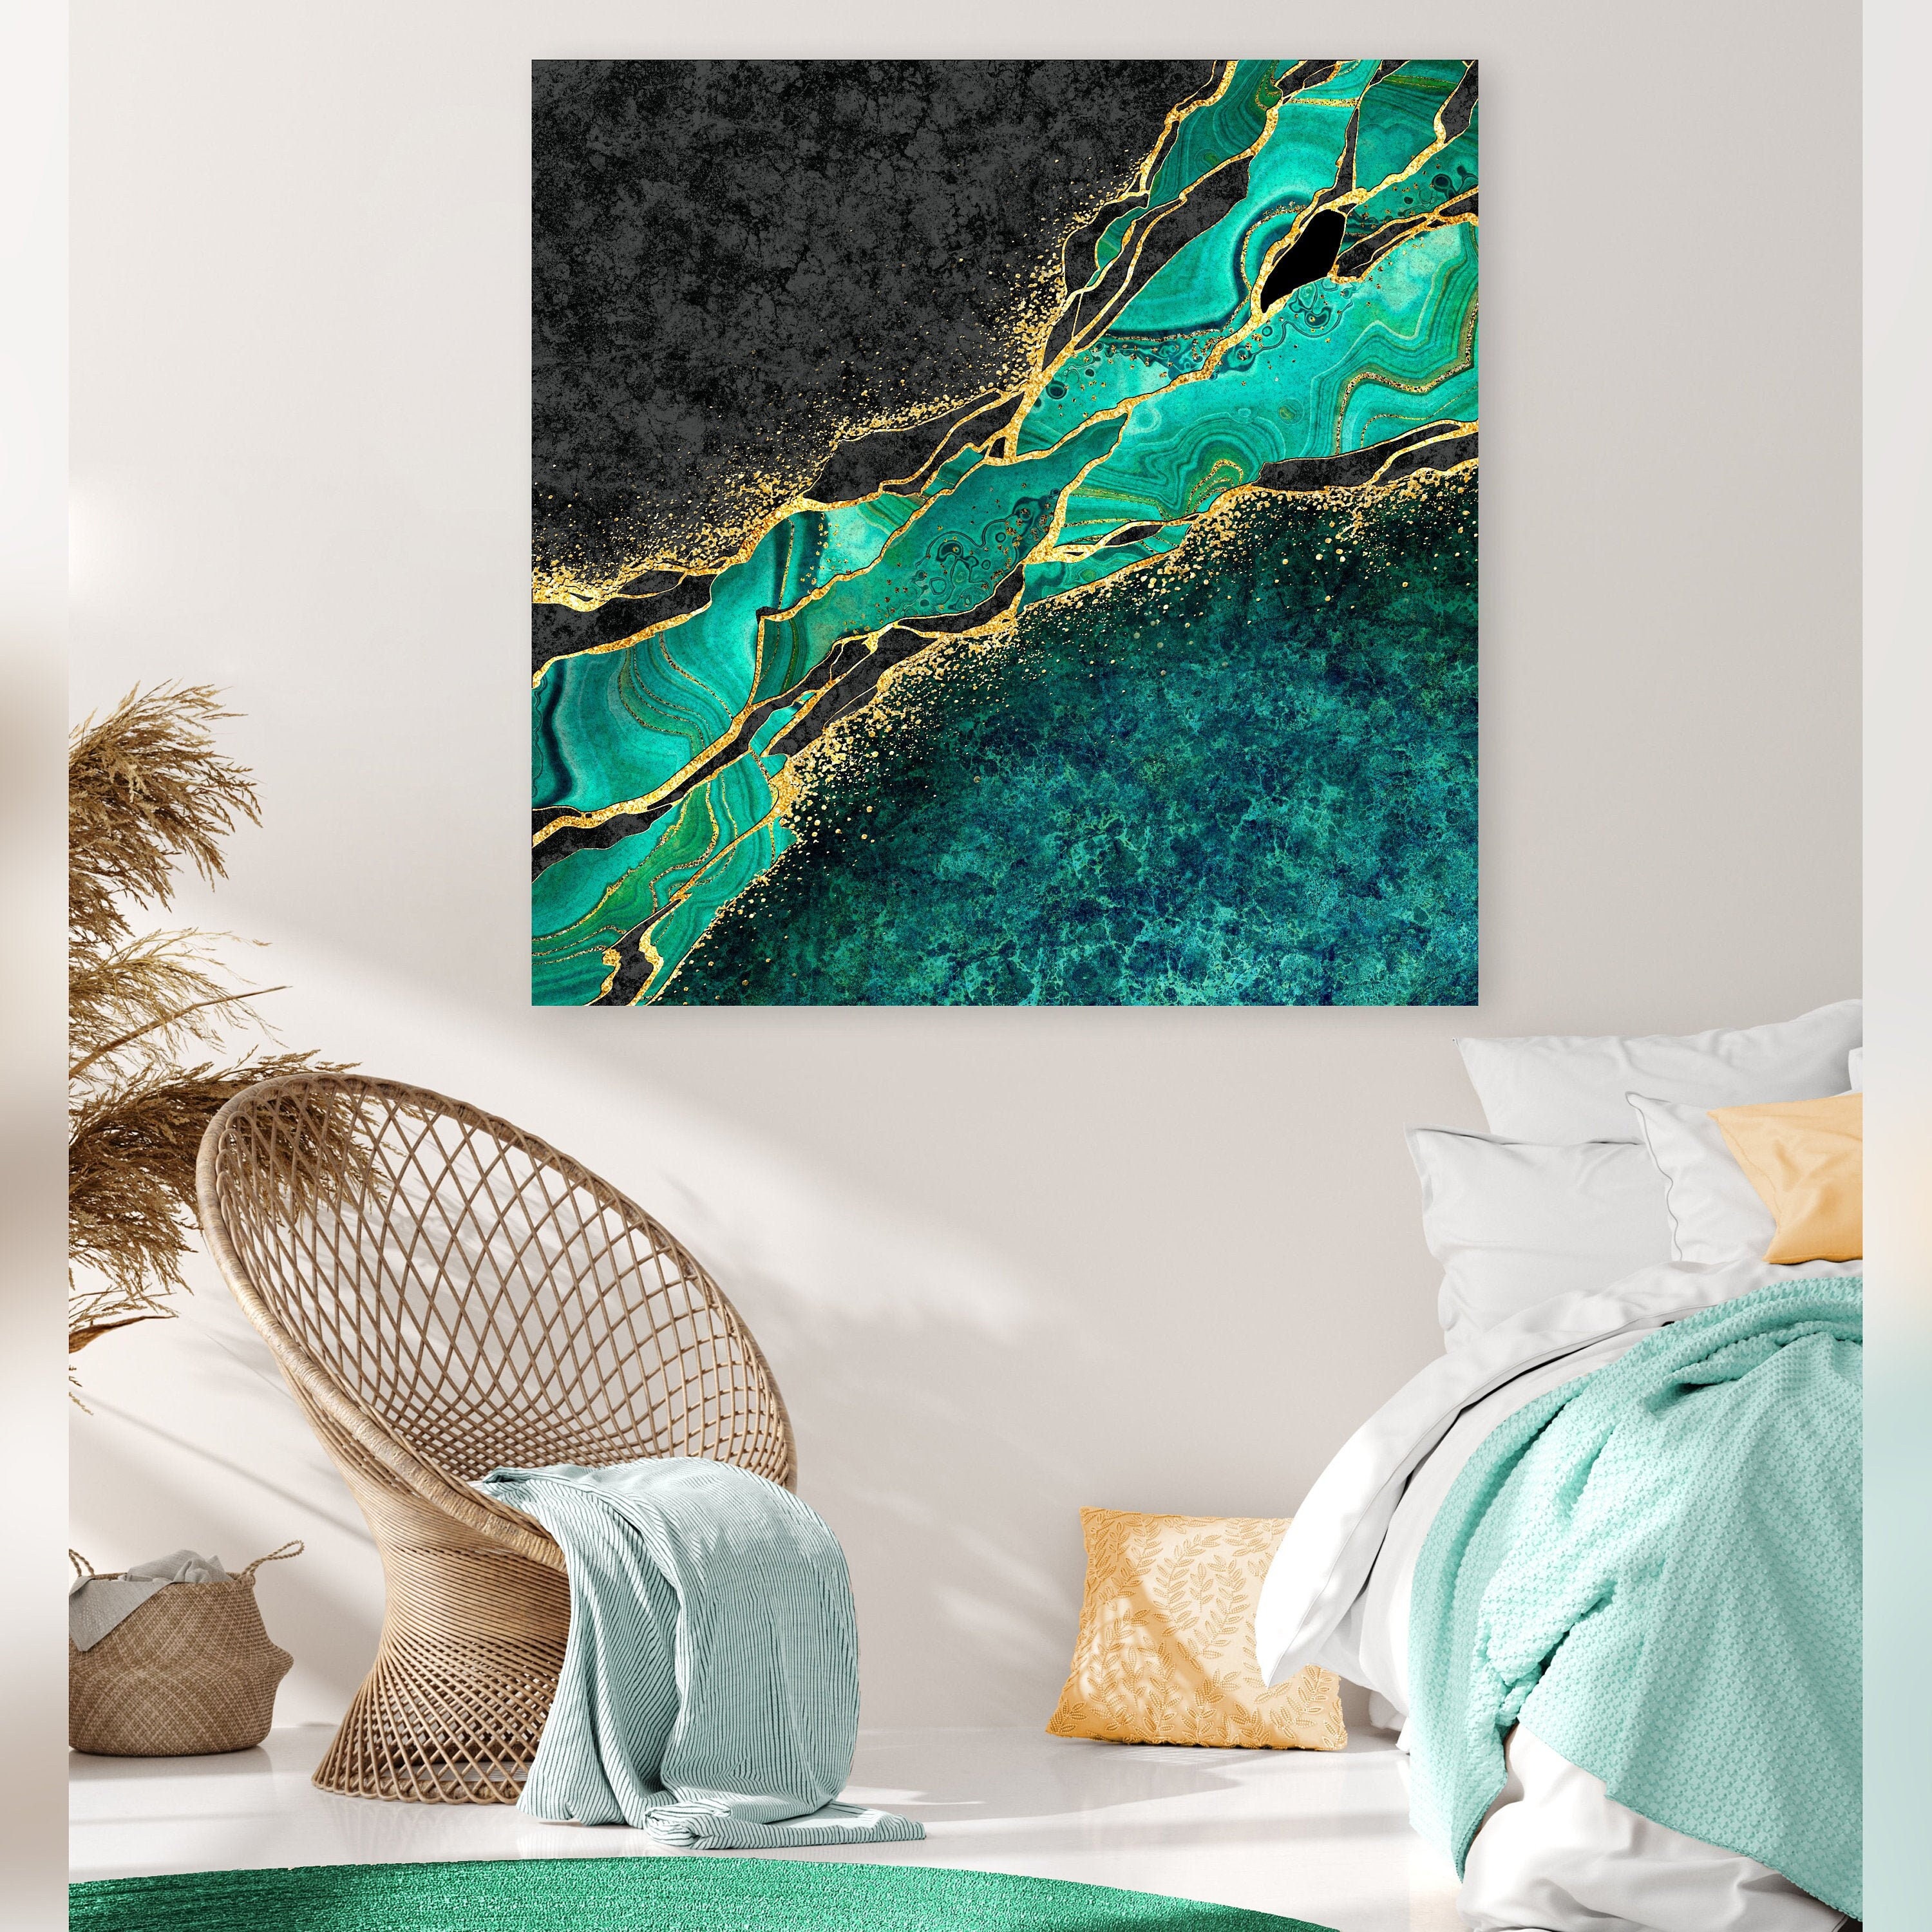 Veins of The Leaf Canvas Wall Art Decor, Artwork Modern Home Decor, Ready to Hang, Size: 20×30Inch